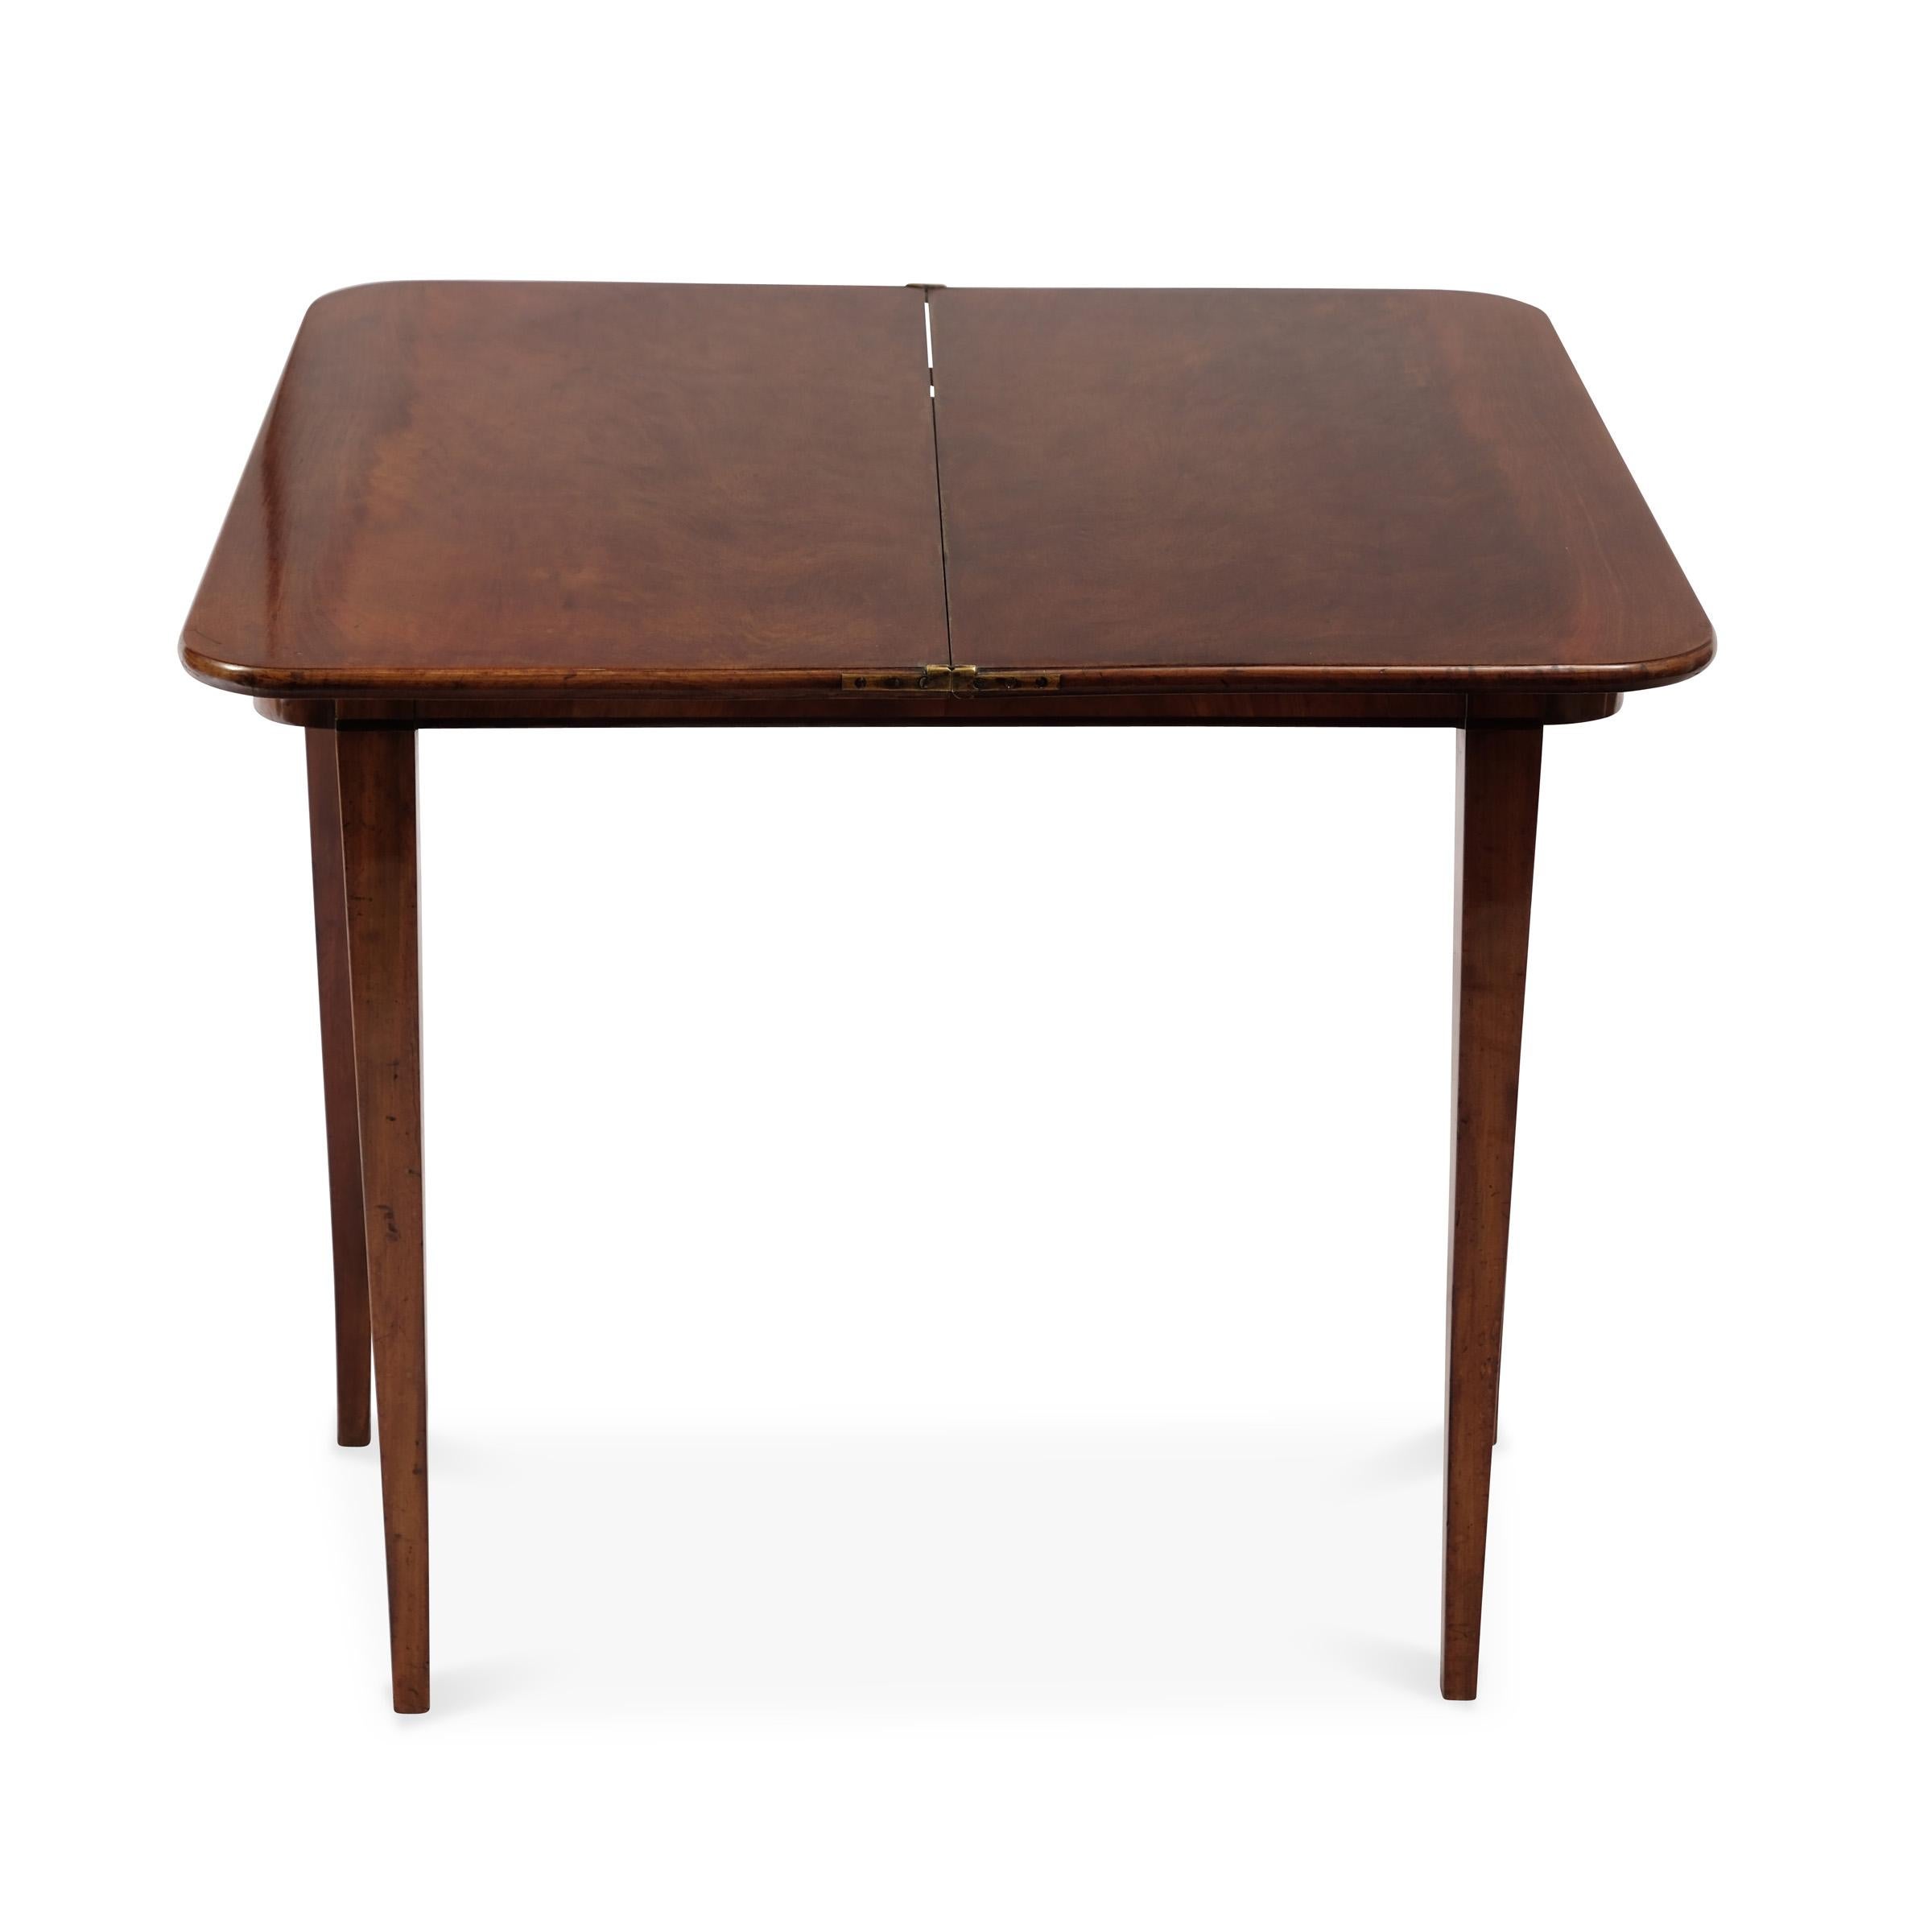 19th Century Biedermeier Folding Console Table Mahogany In Good Condition For Sale In Münster, DE